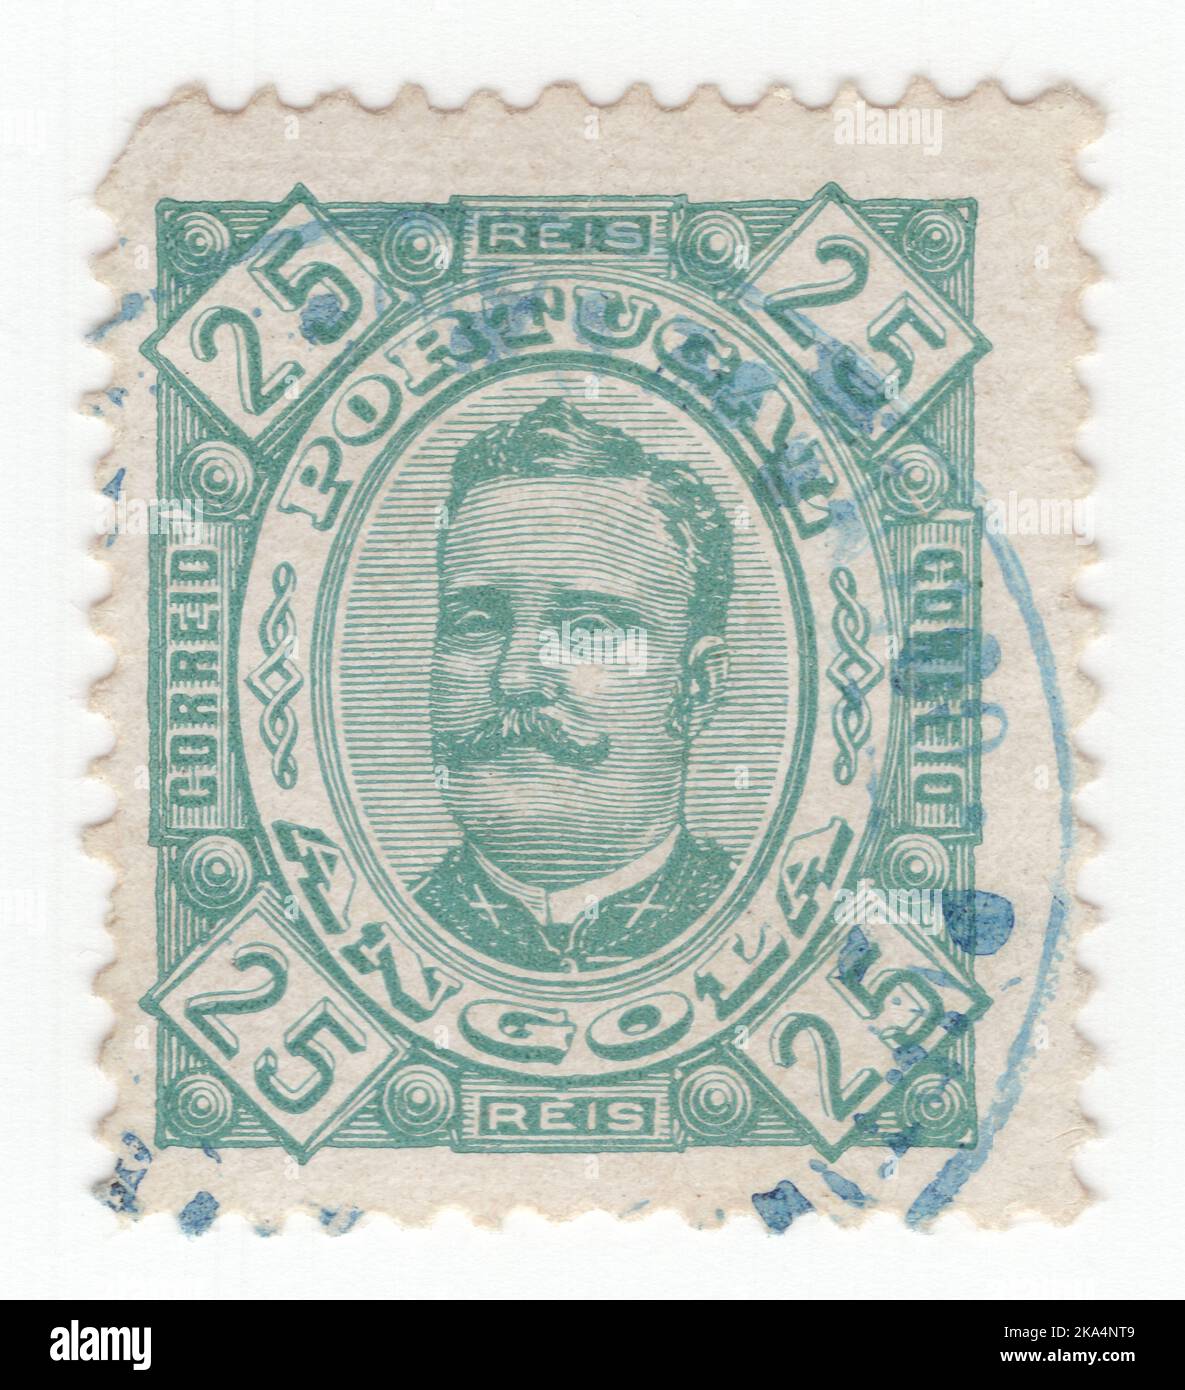 ANGOLA - CIRCA 1893: An 25 reis green postage stamp showing portrait of Dom Carlos I, known as the Diplomat, the Martyr, and the Oceanographer, King of Portugal Stock Photo